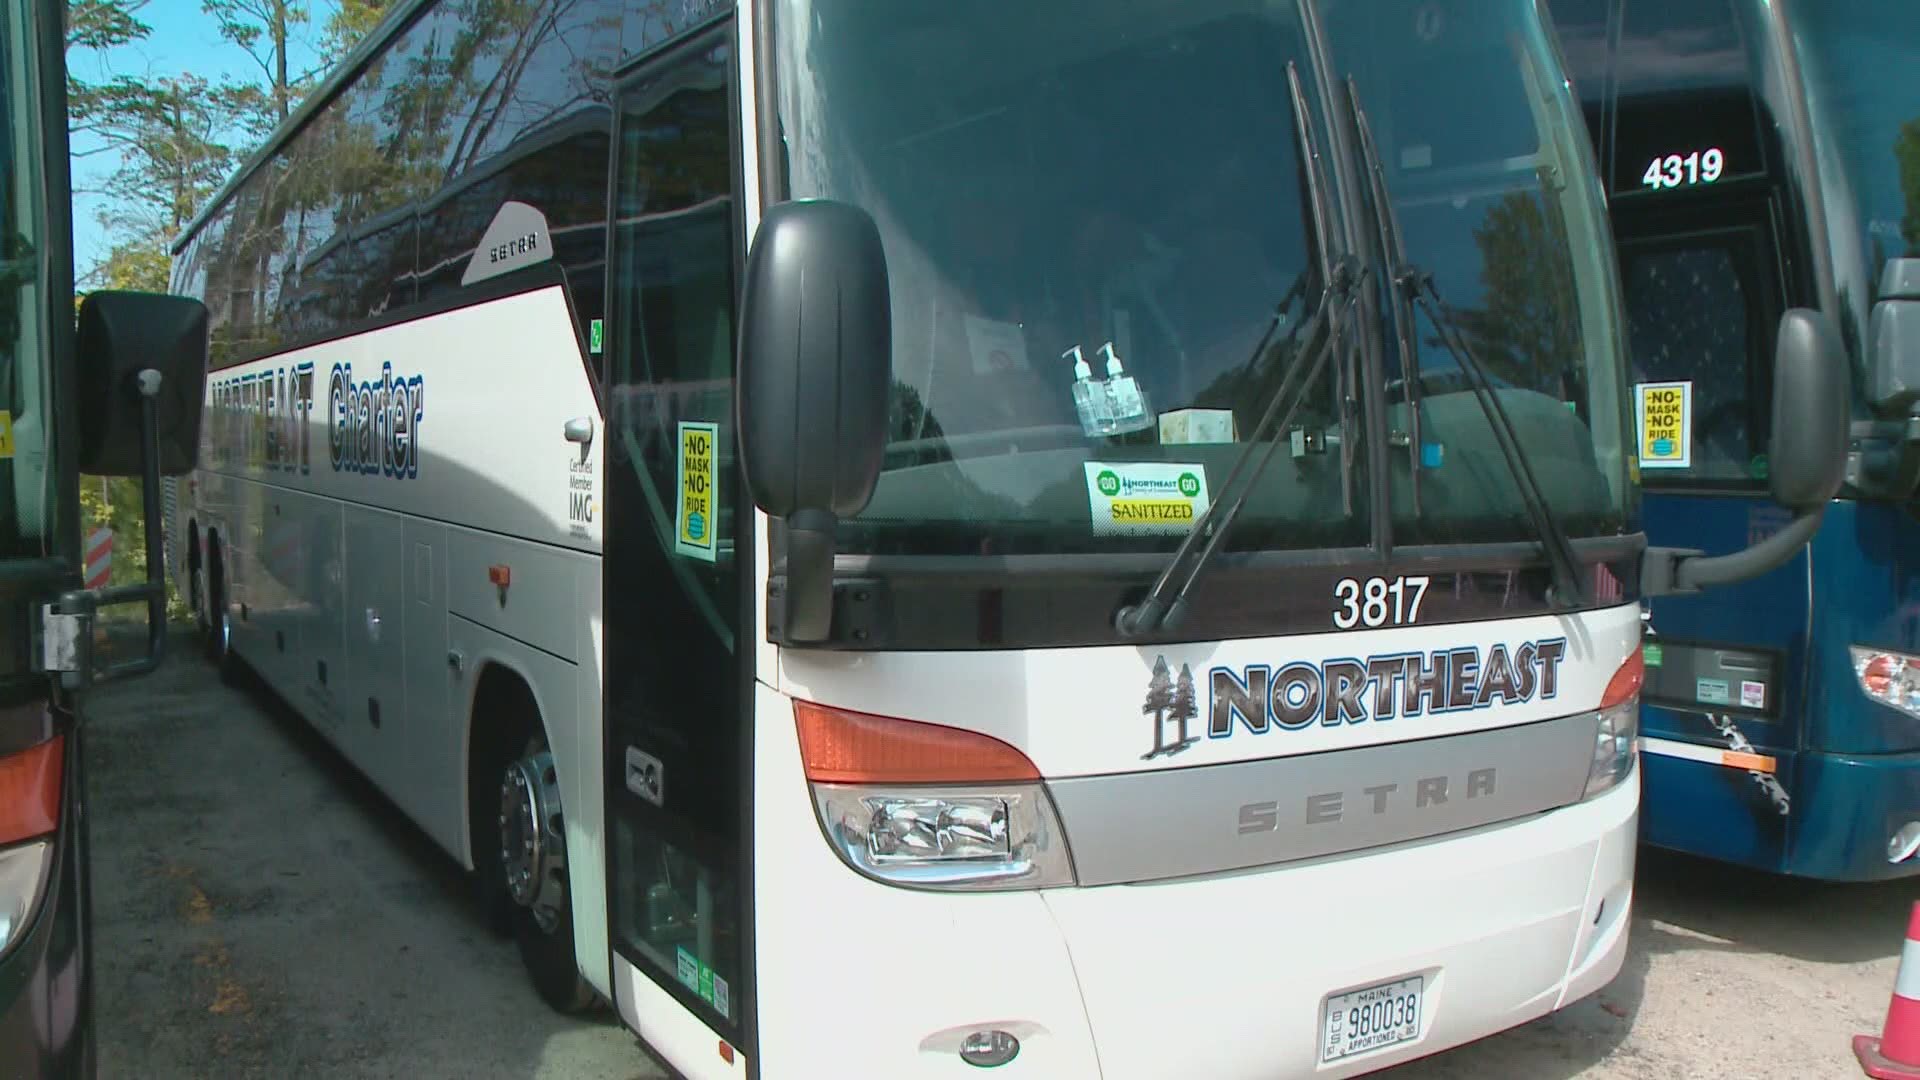 Groups just aren't looking to use motorcoach companies and leaving them struggling with the coronavirus economy